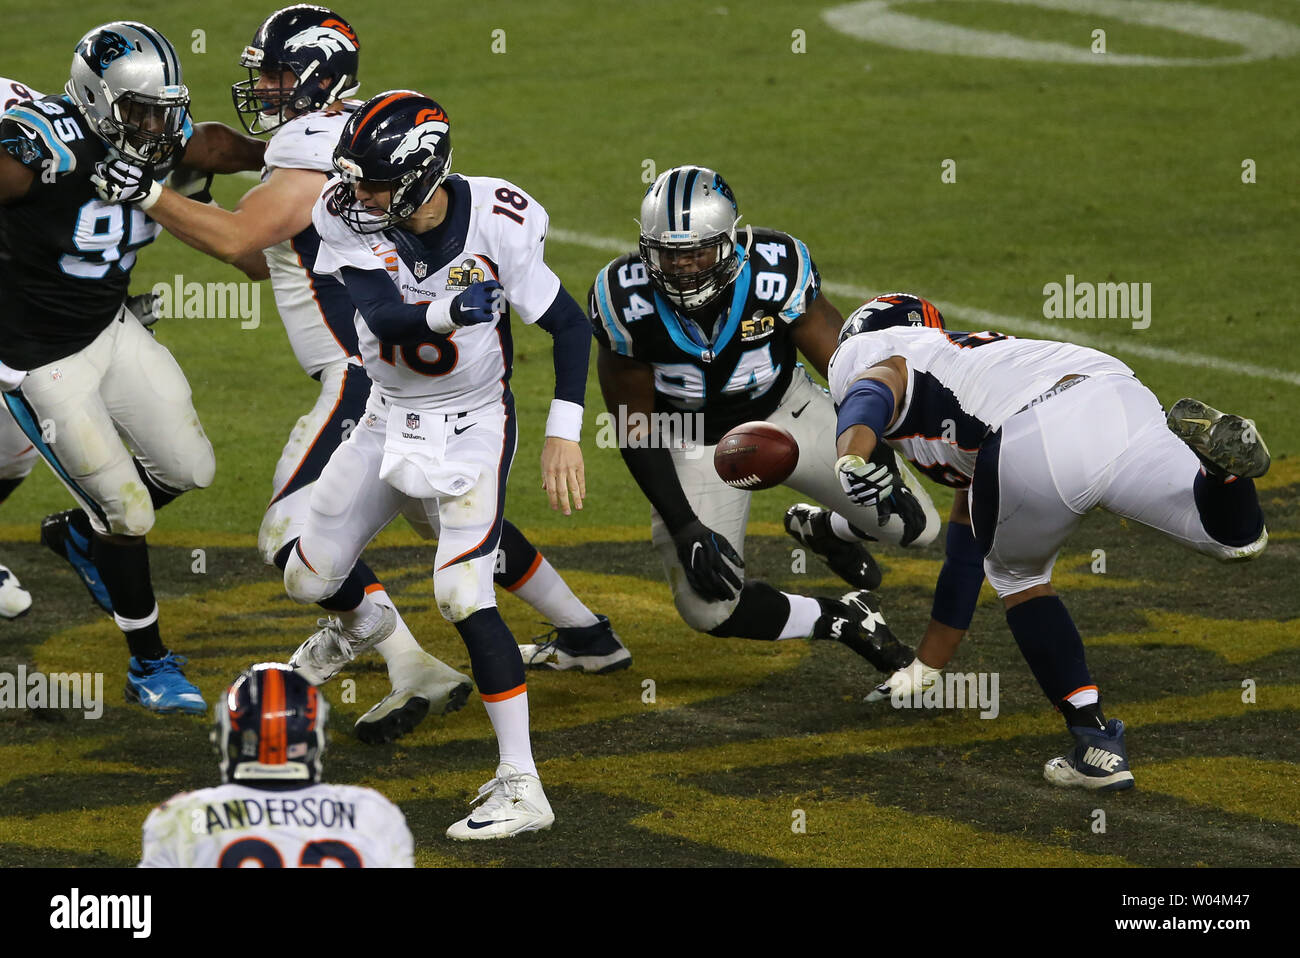 Carolina Panthers defensive end Kony Ealy (94) strips the ball away from Denver Broncos quarterback Peyton Manning (18) in the third quarter during Super Bowl 50 at Levi's Stadium in Santa Clara, California on February 7, 2016.    Photo by Bruce Gordon/UPI Stock Photo